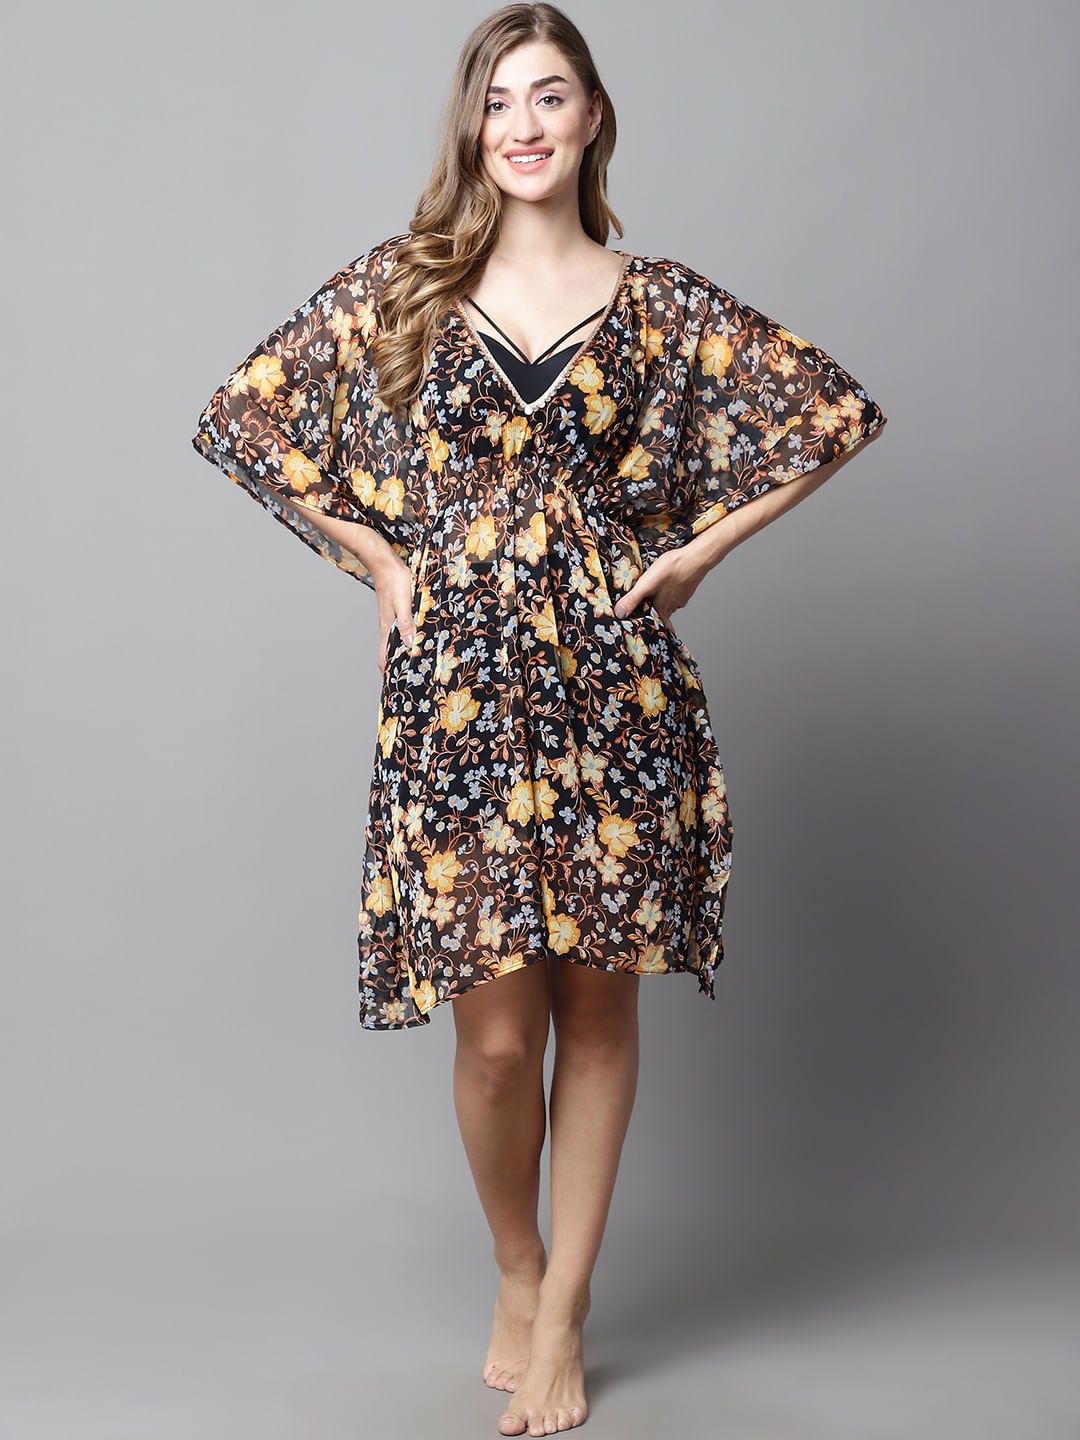 Black & Yellow Floral Cover Up Dress